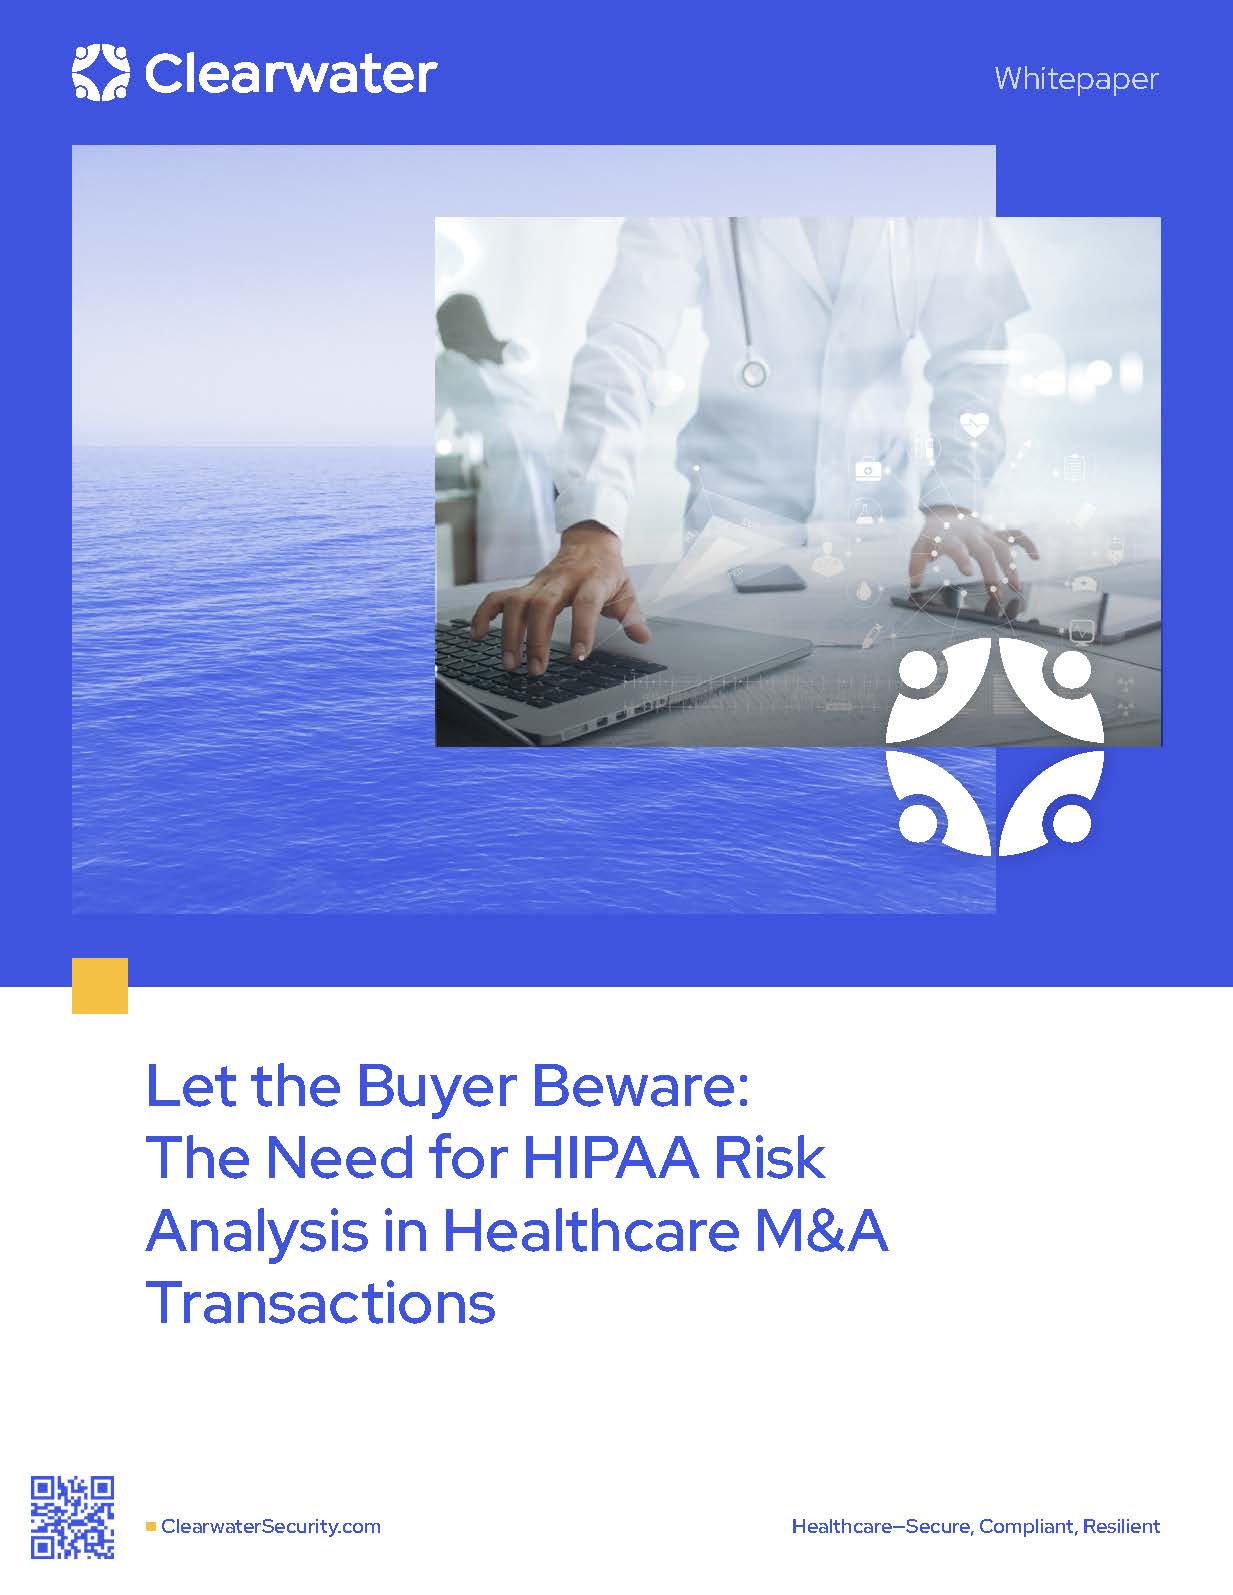 Let the Buyer Beware: The Need for HIPAA Risk Analysis in Healthcare by Clearwater